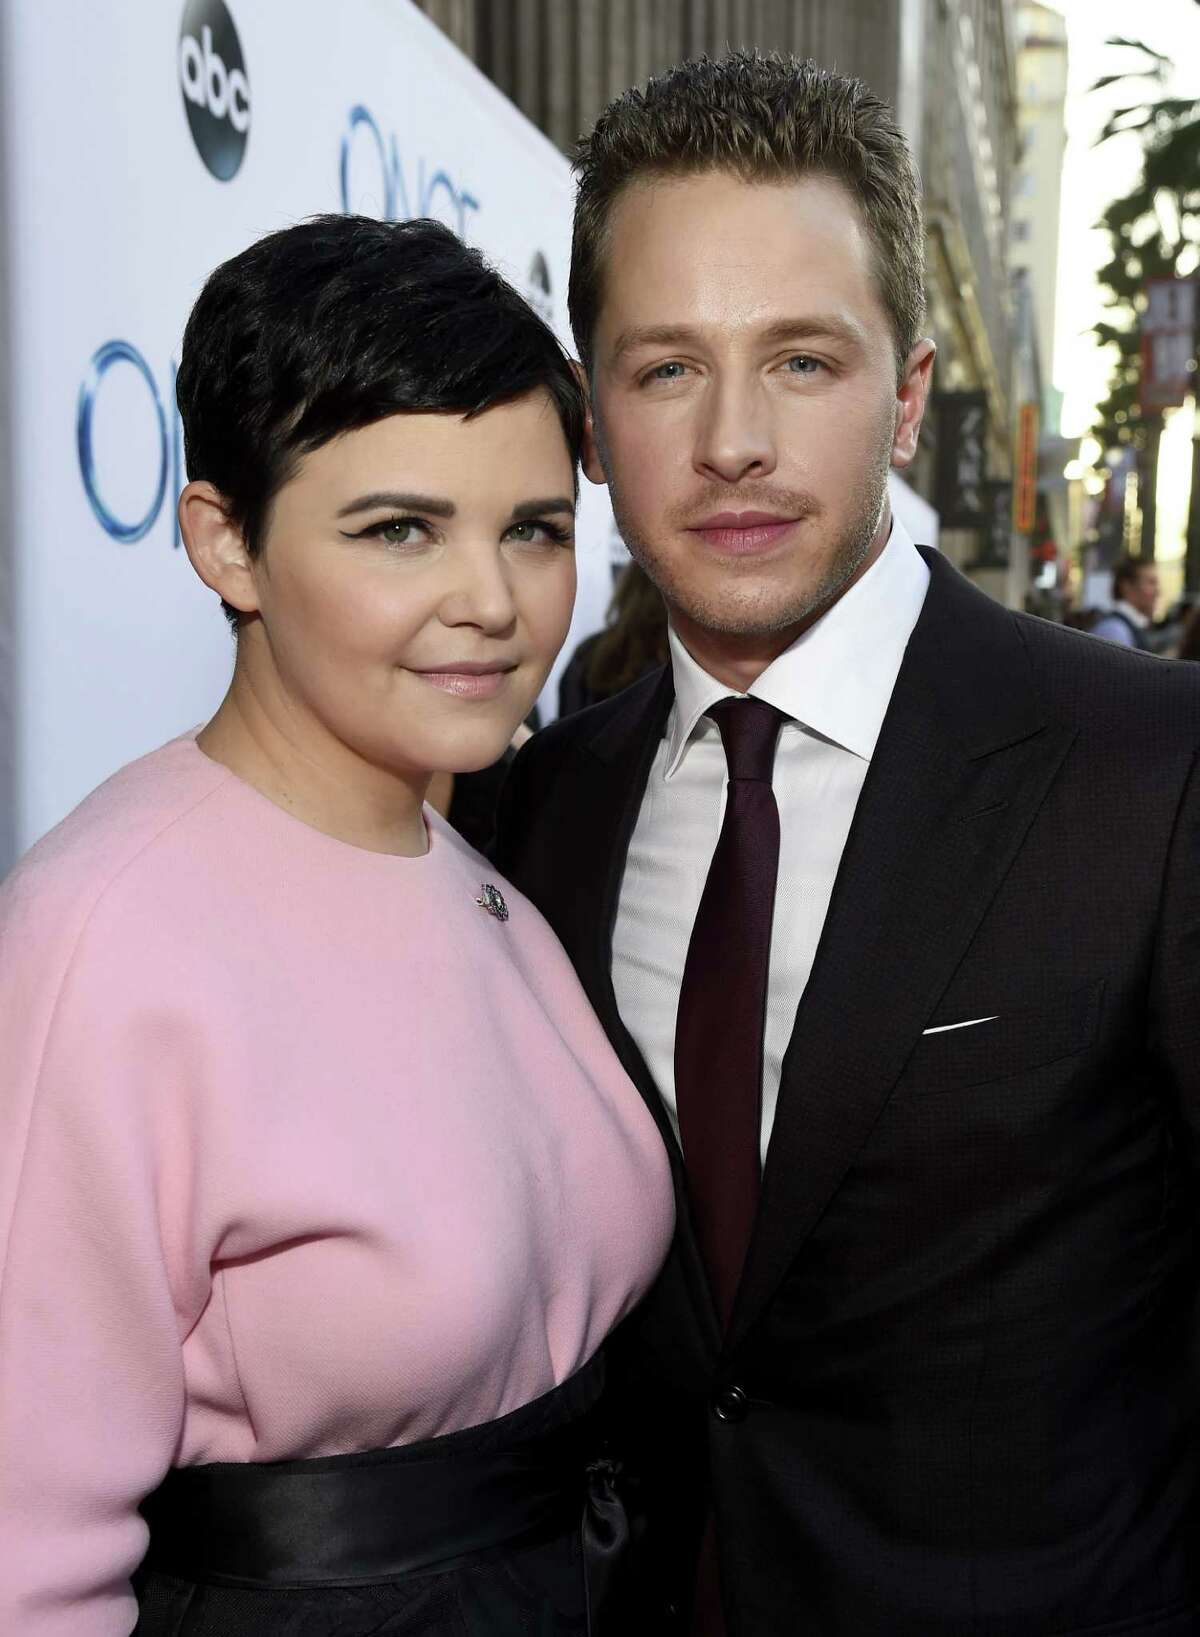 Actress Ginnifer Godwin and Actor Josh Dallas attend a screening of ABC's "Once Upon A Time" Season 4 at the El Capitan Theatre on September 21, 2014 in Hollywood, California.